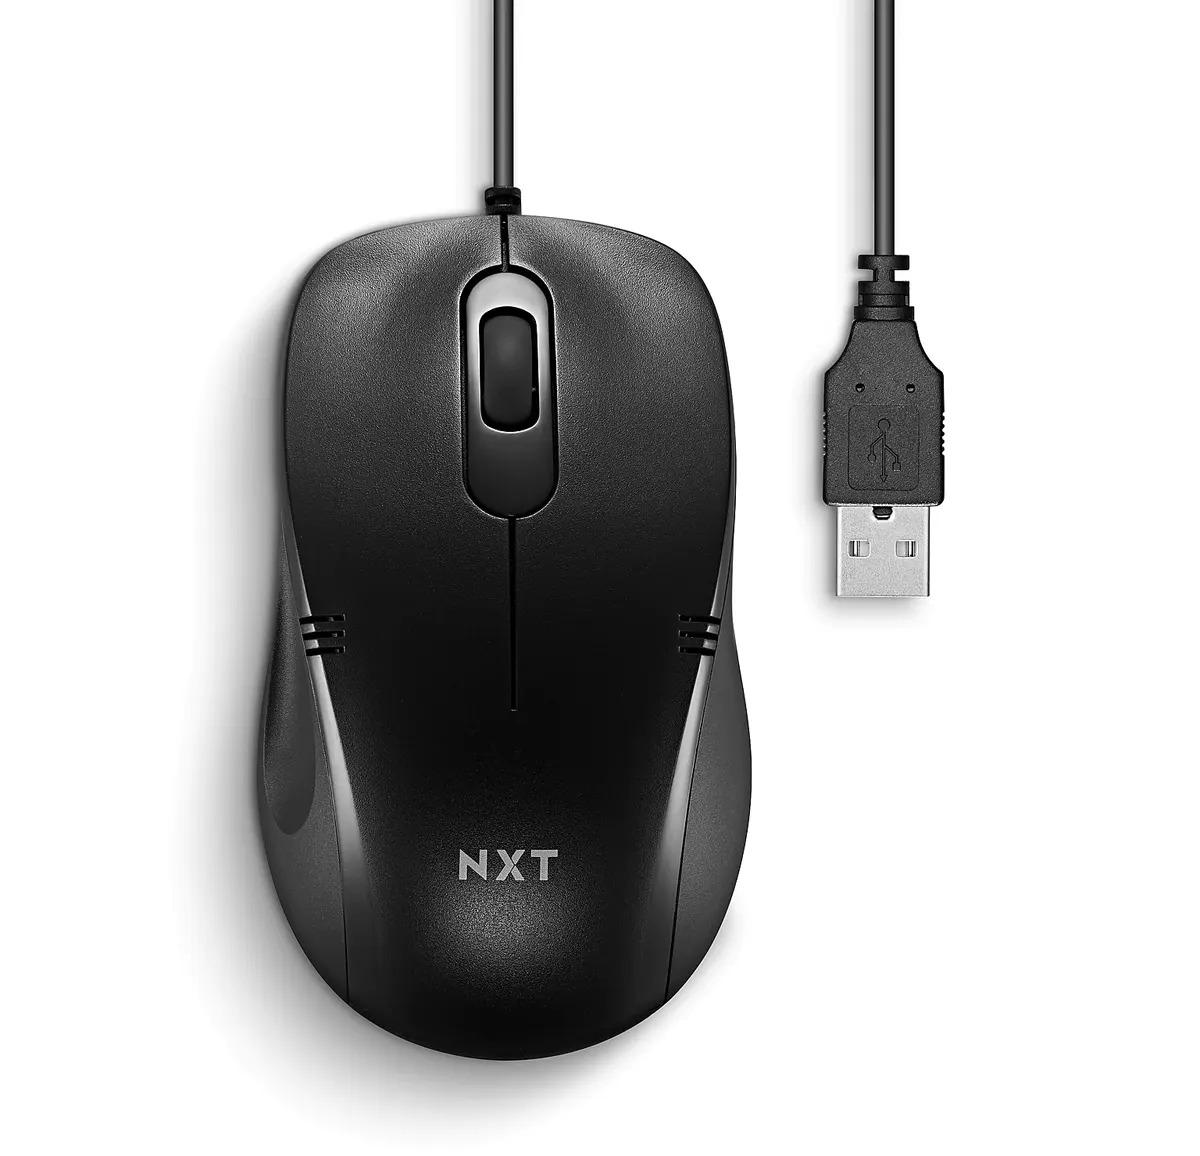 NXT Technologies Optical USB Mouse for $3.24 Shipped